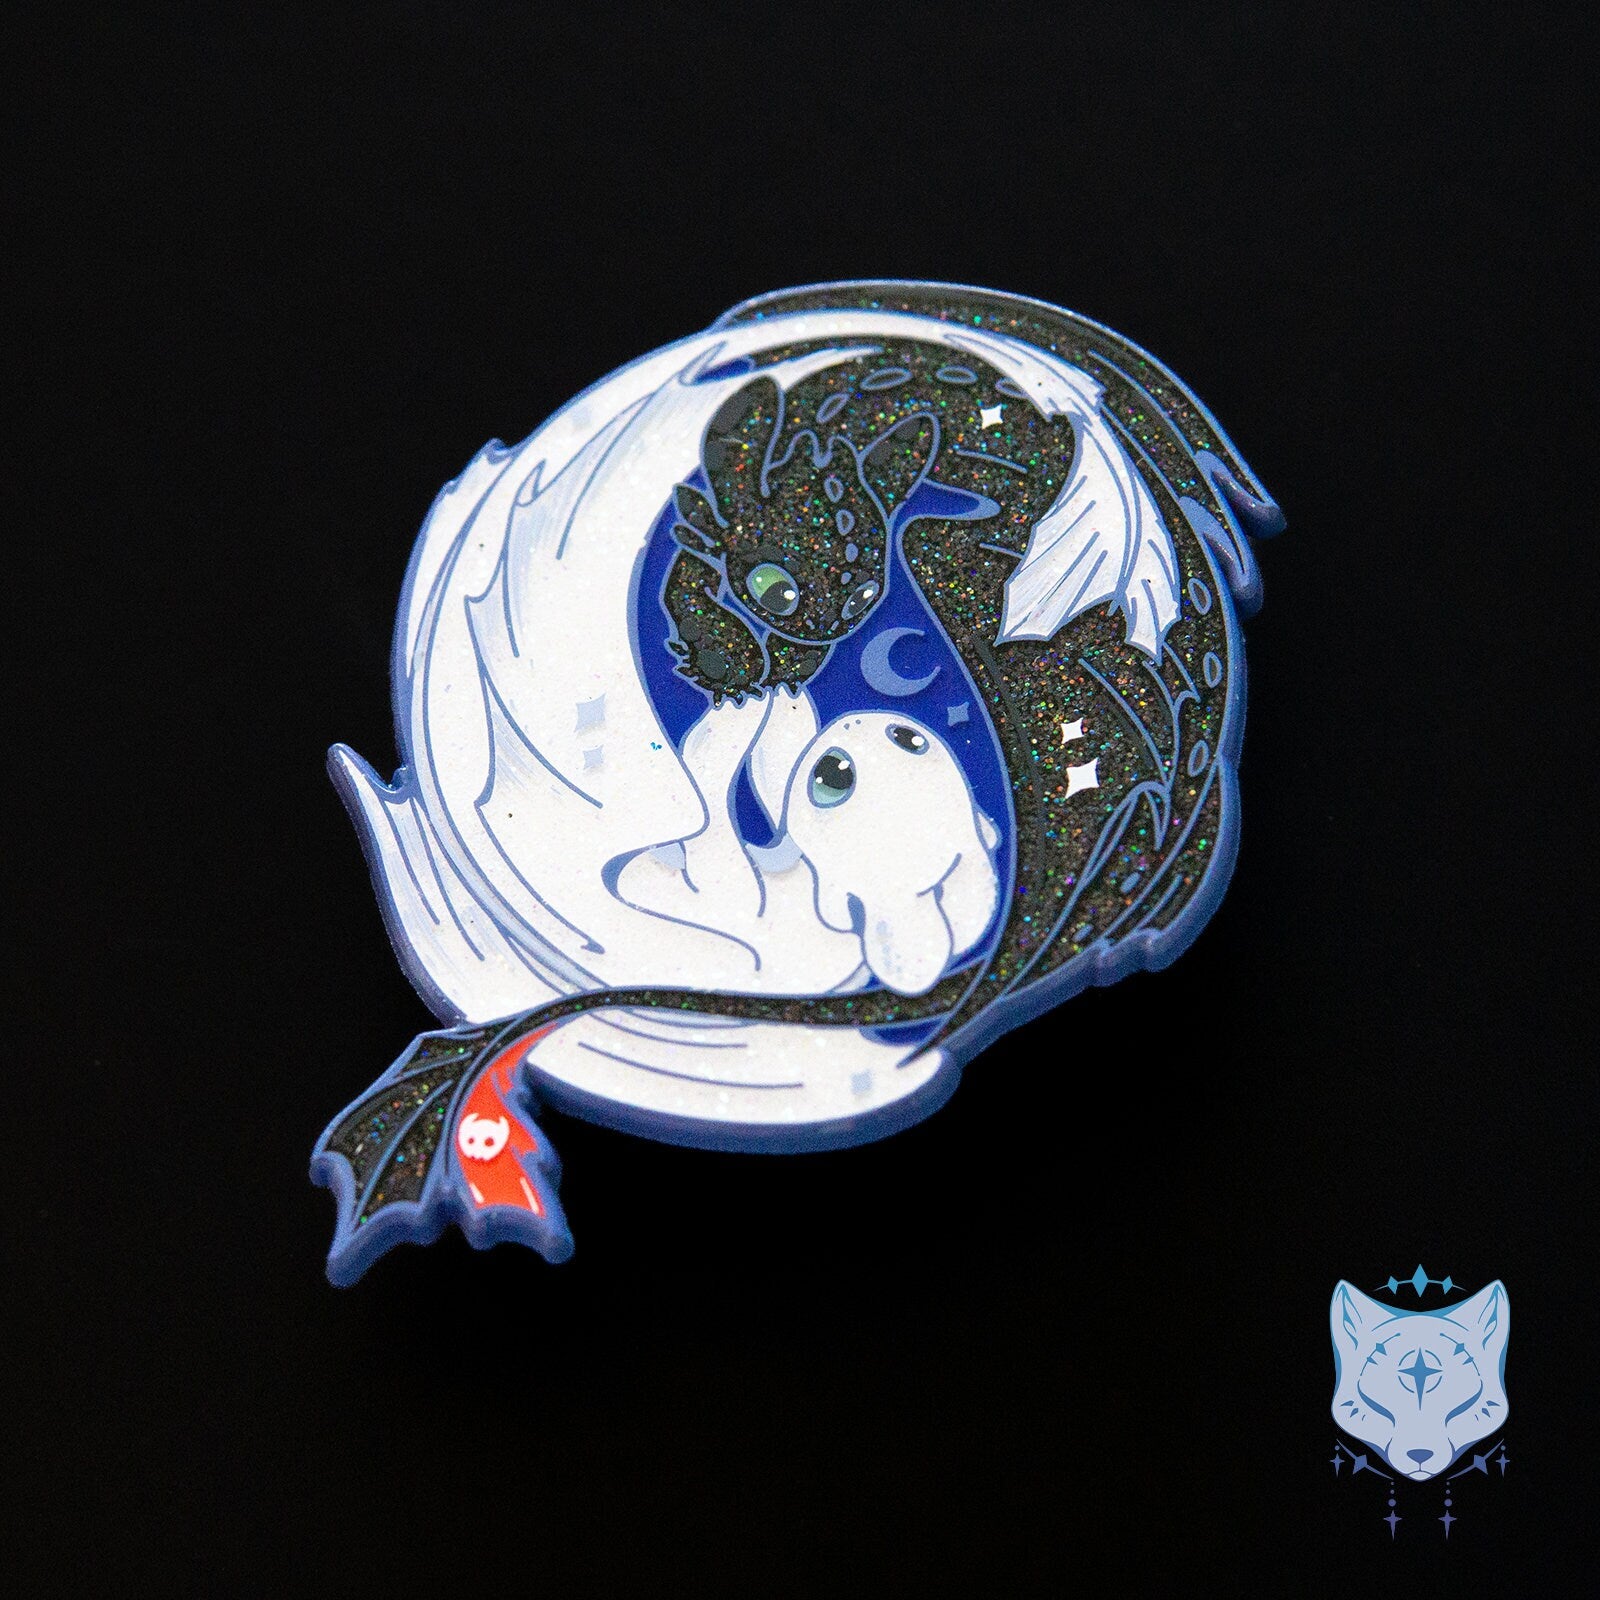 HTTYD "Flight of Dragons" - LE 110 Dyed Metal 2.5" pin